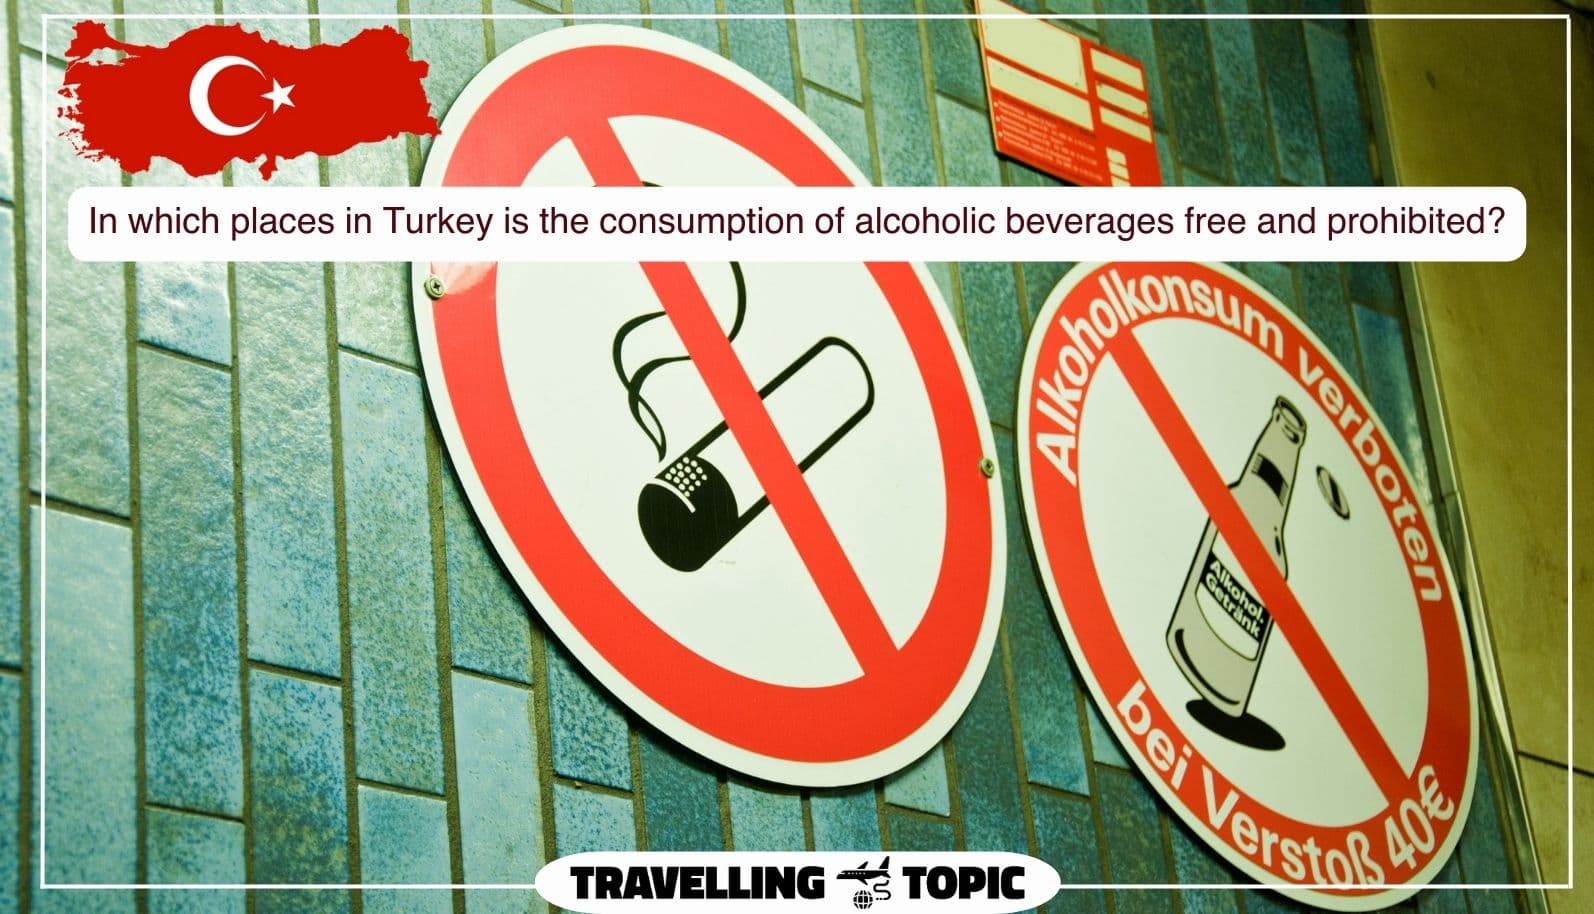 In which places in Turkey is the consumption of alcoholic beverages free and prohibited?